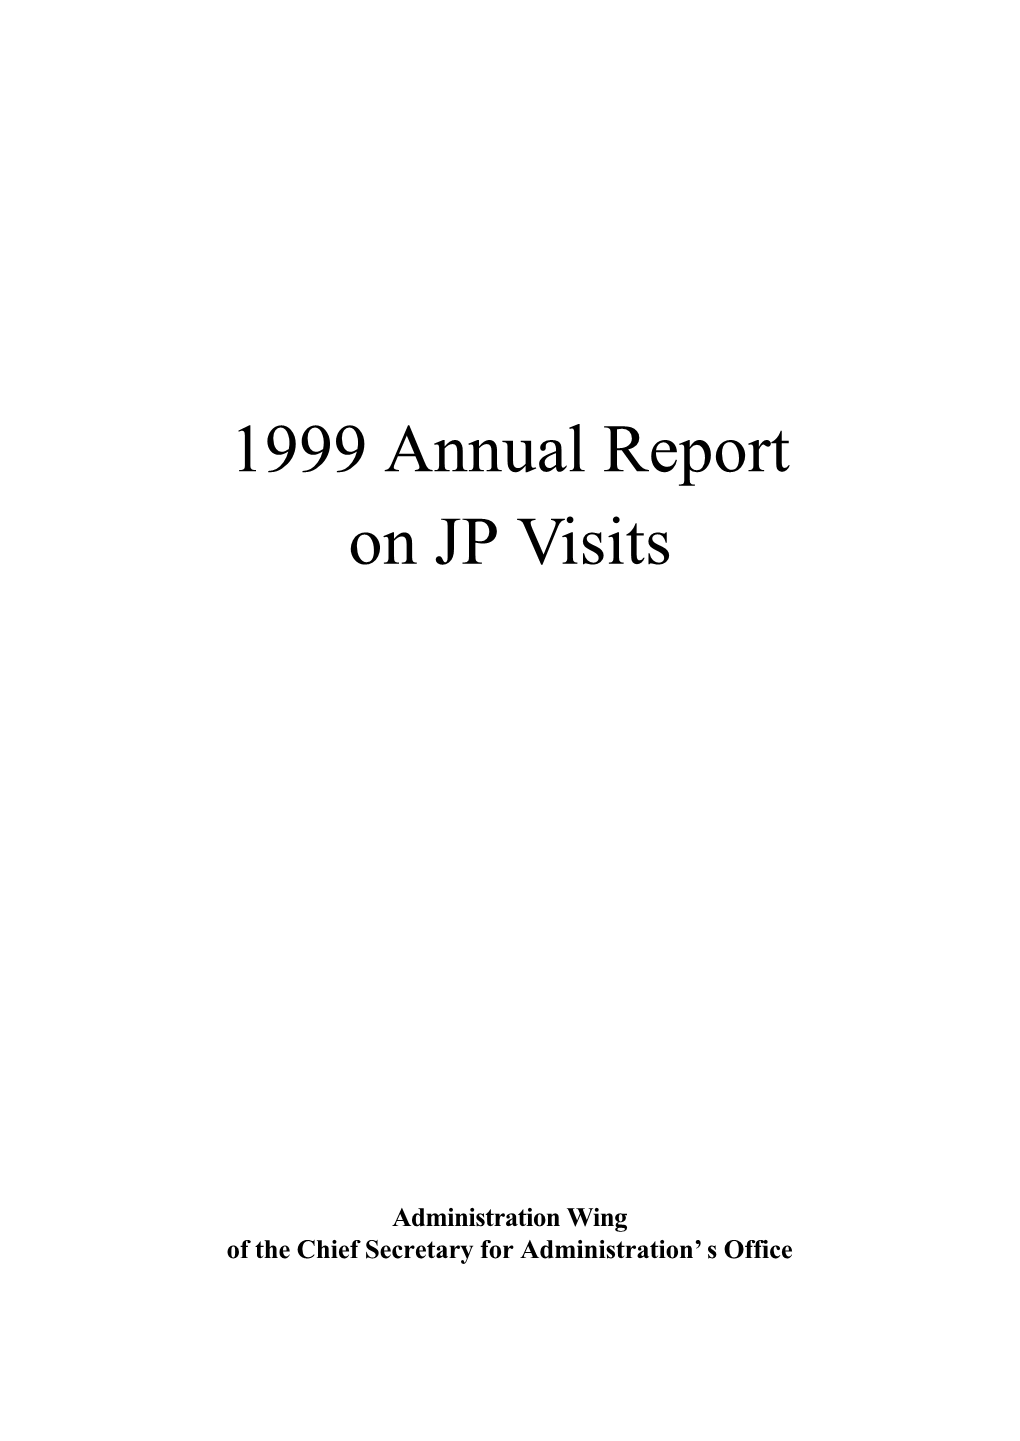 1999 Annual Report on JP Visits